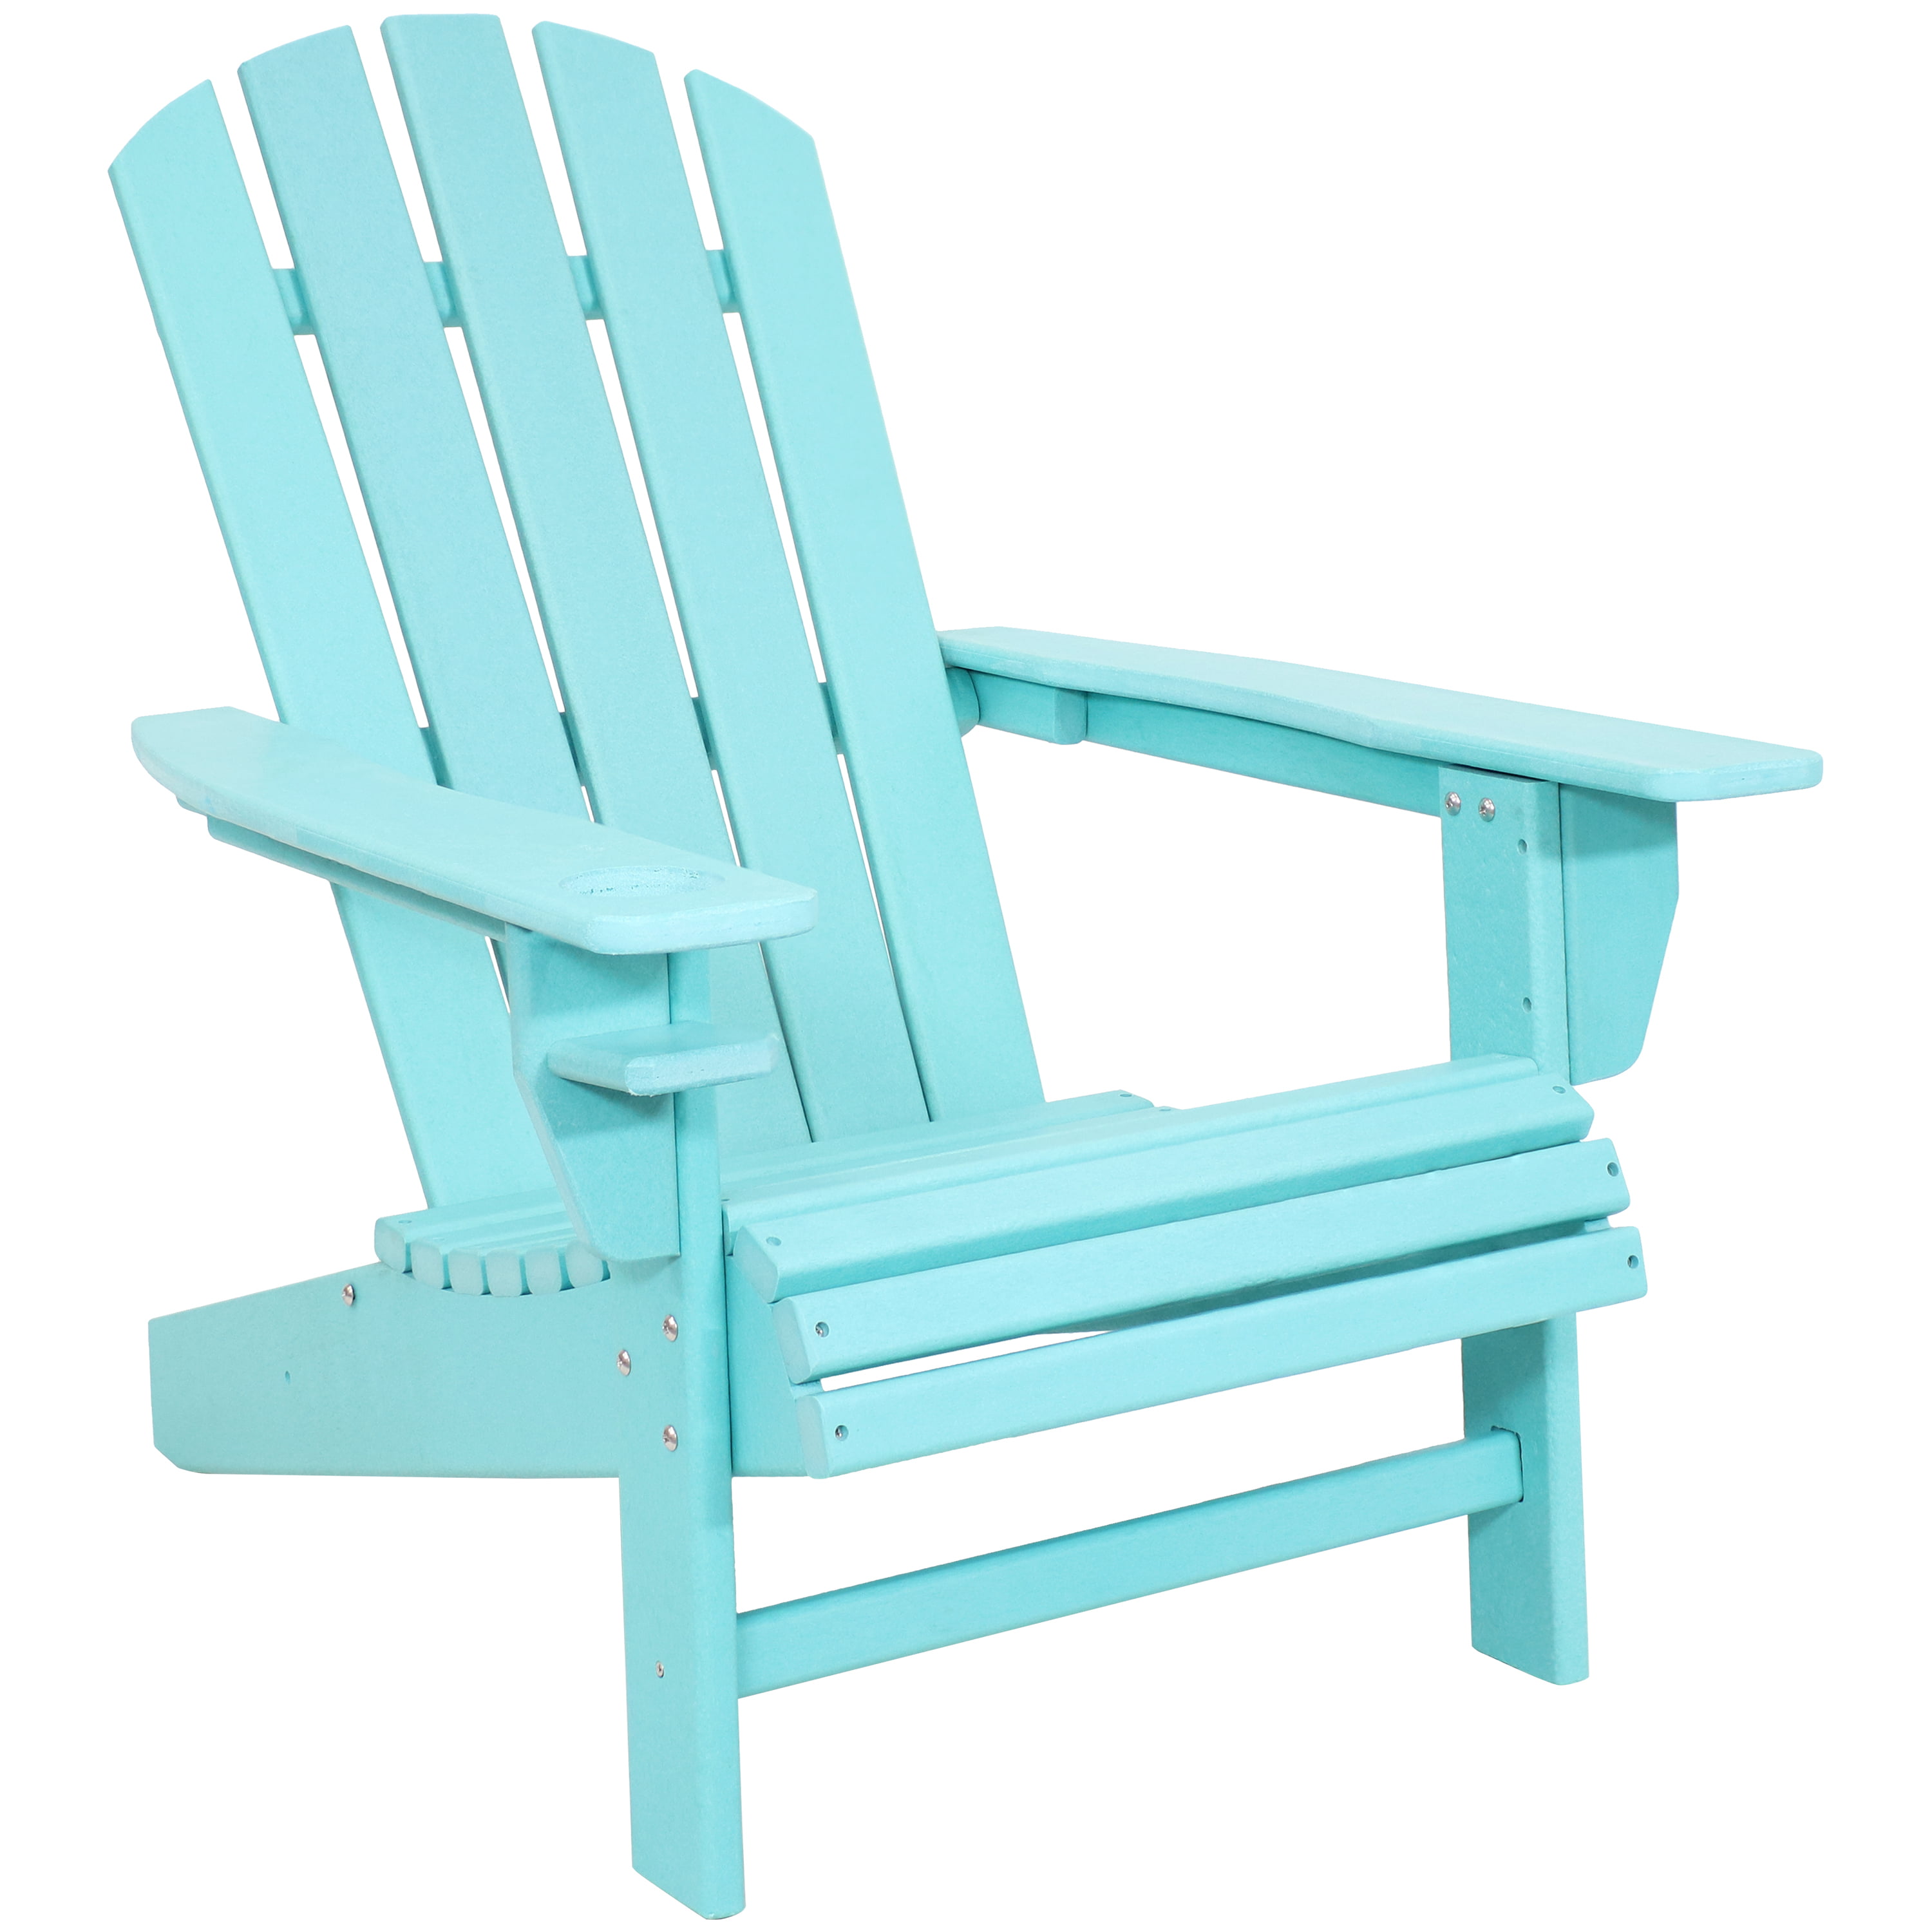 Ideal for Lawn Garden or Around The Firepit Sunnydaze All-Weather Outdoor Adirondack Chair with Drink Holder Heavy Duty HDPE Weatherproof Patio Chair Turquoise Set of 2 